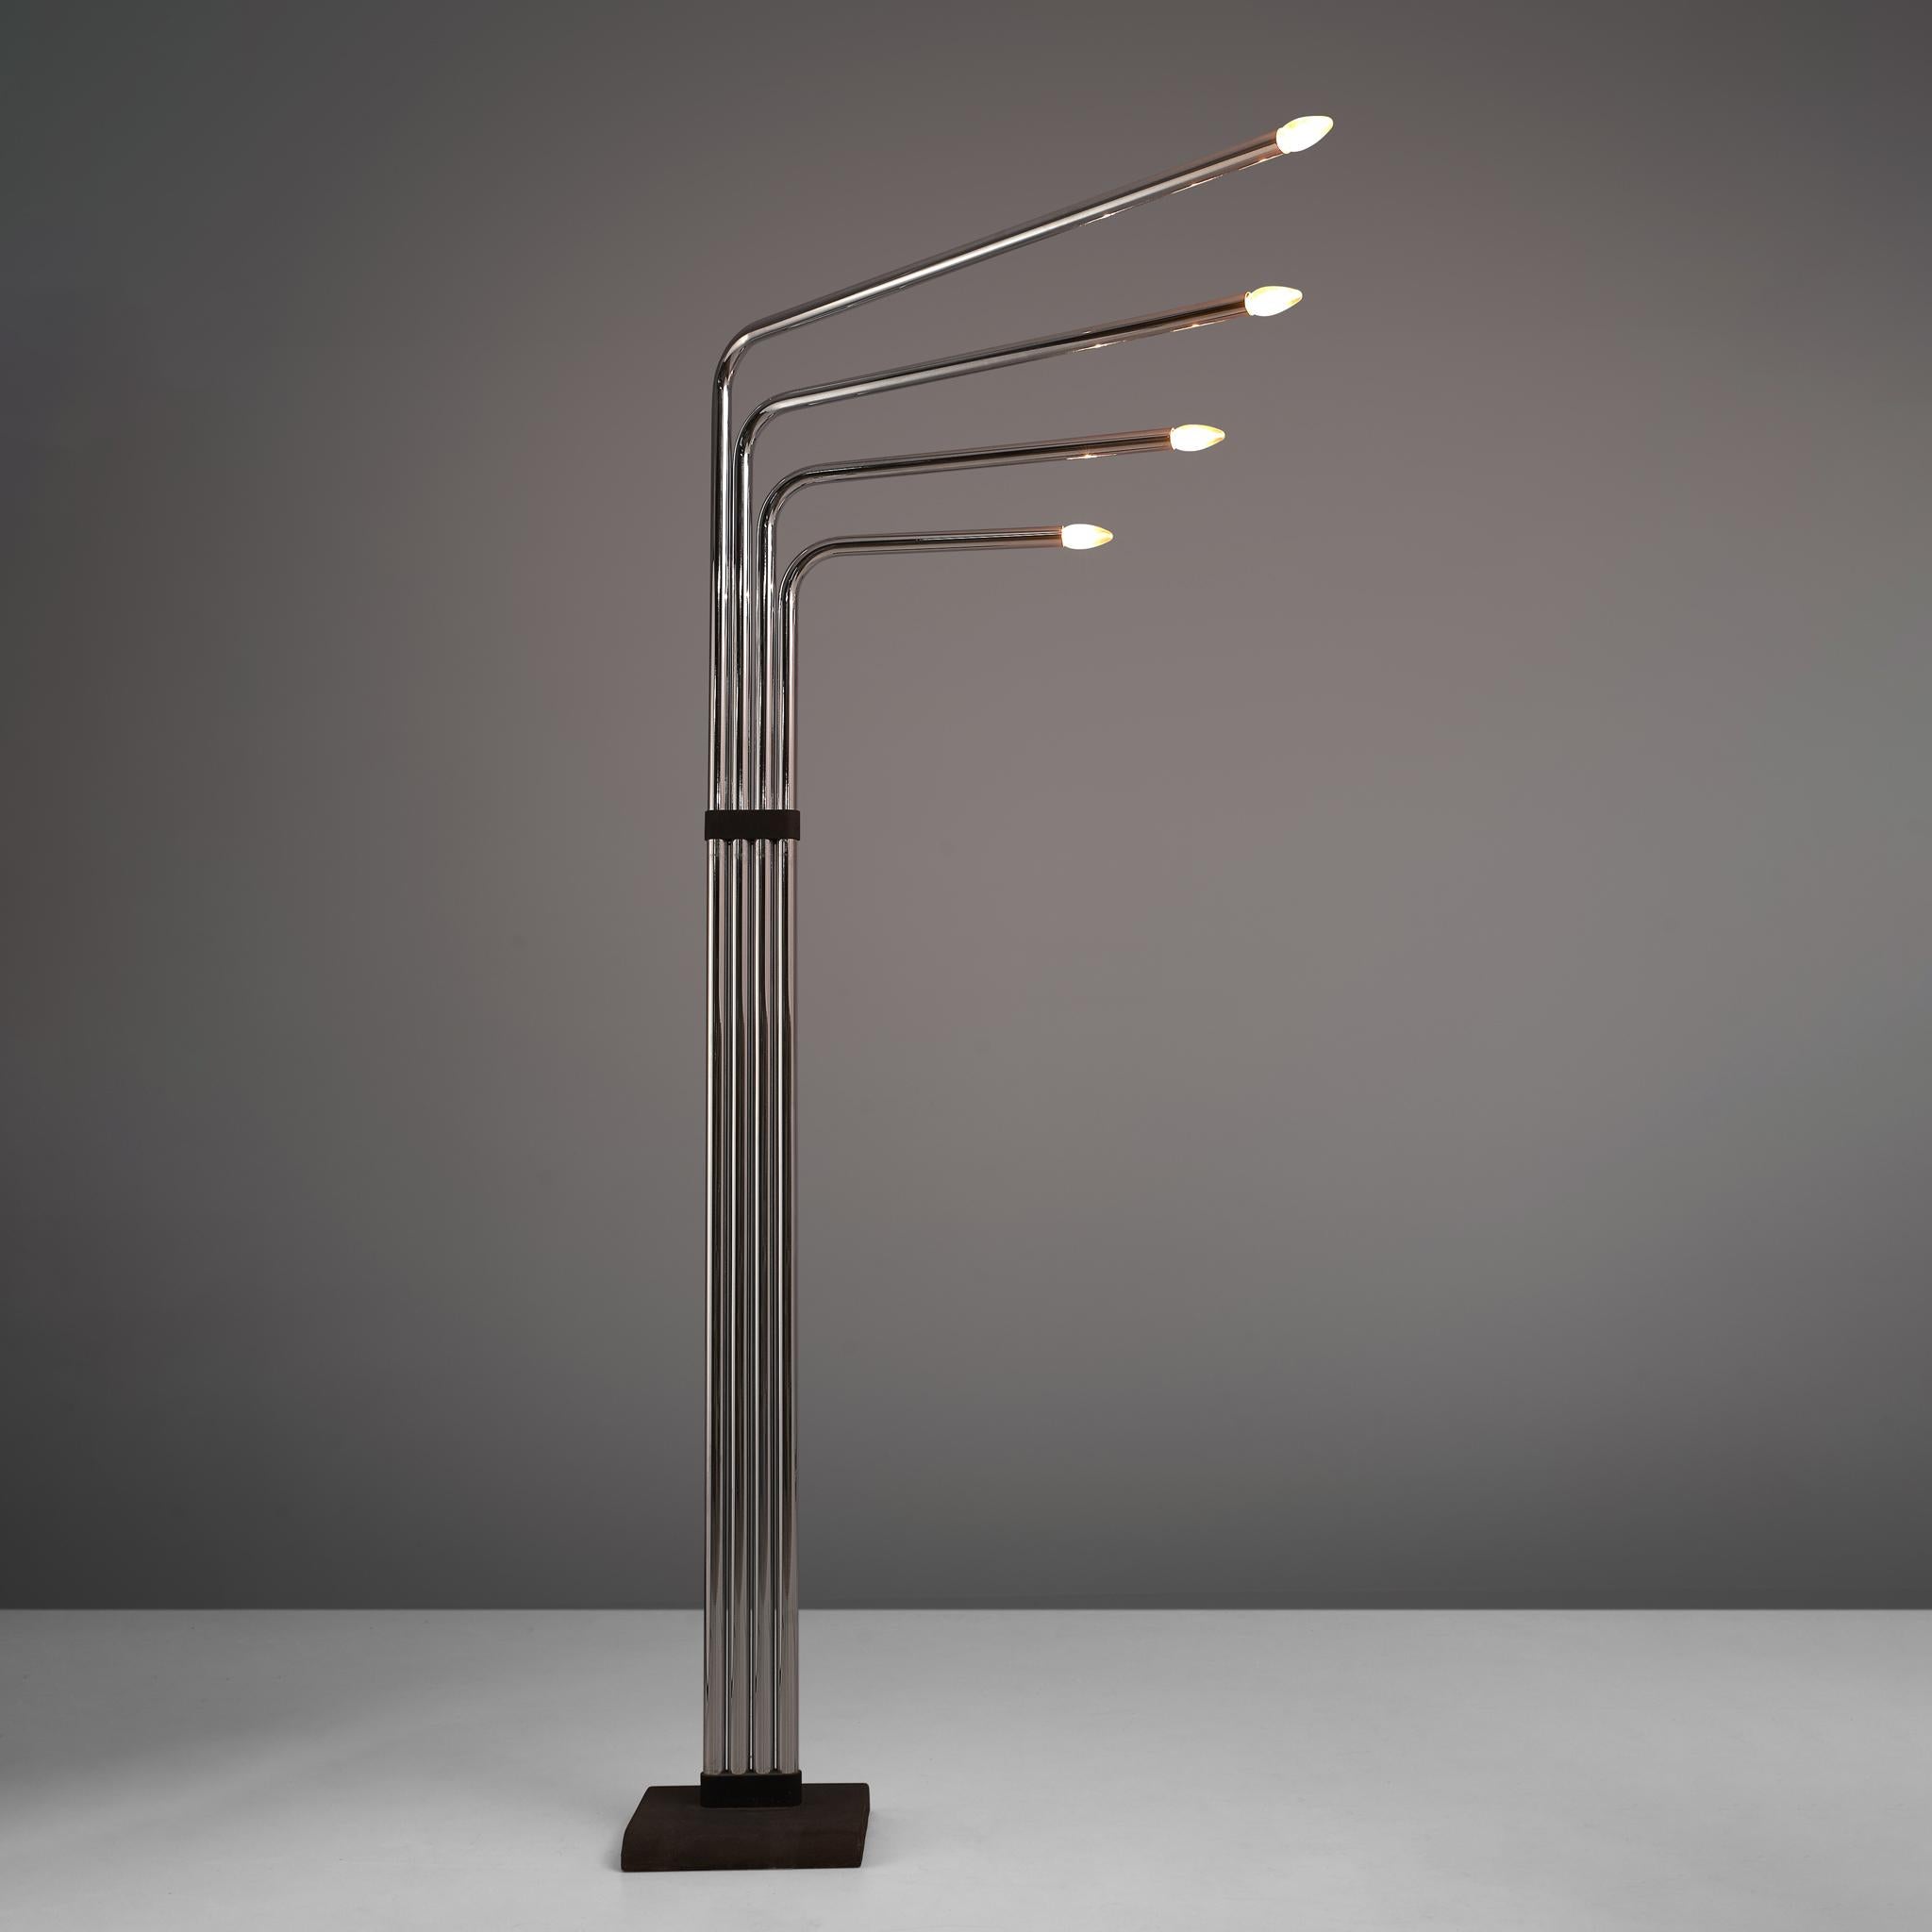 Goffredo Reggiani for Reggiani Illuminazione, floor lamp, chromed steel, Italy, 1974

Architectural floor lamp with four tubular arms by Goffredo Reggiani. Each of the four chrome tubes bents at different heights with 90 degrees and can be